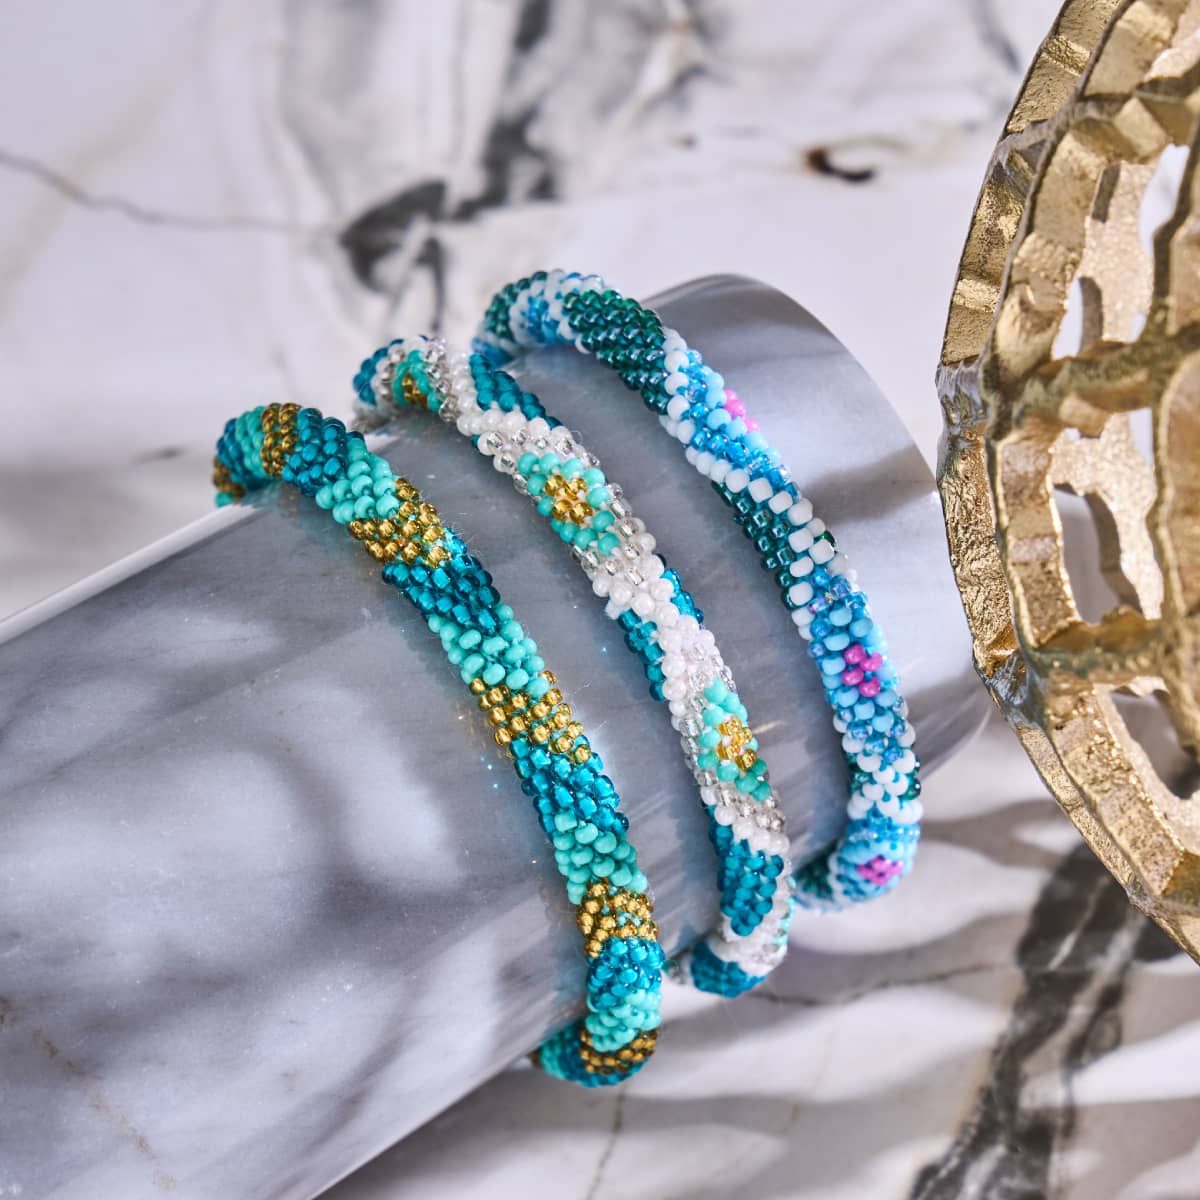 You all know where to get the prettiest handmade bracelets.🥰✨  https://sashkaco.com/collections/all #sashkaco #handmade #bracelets  #beachlife... | By Sashka Co. BraceletsFacebook